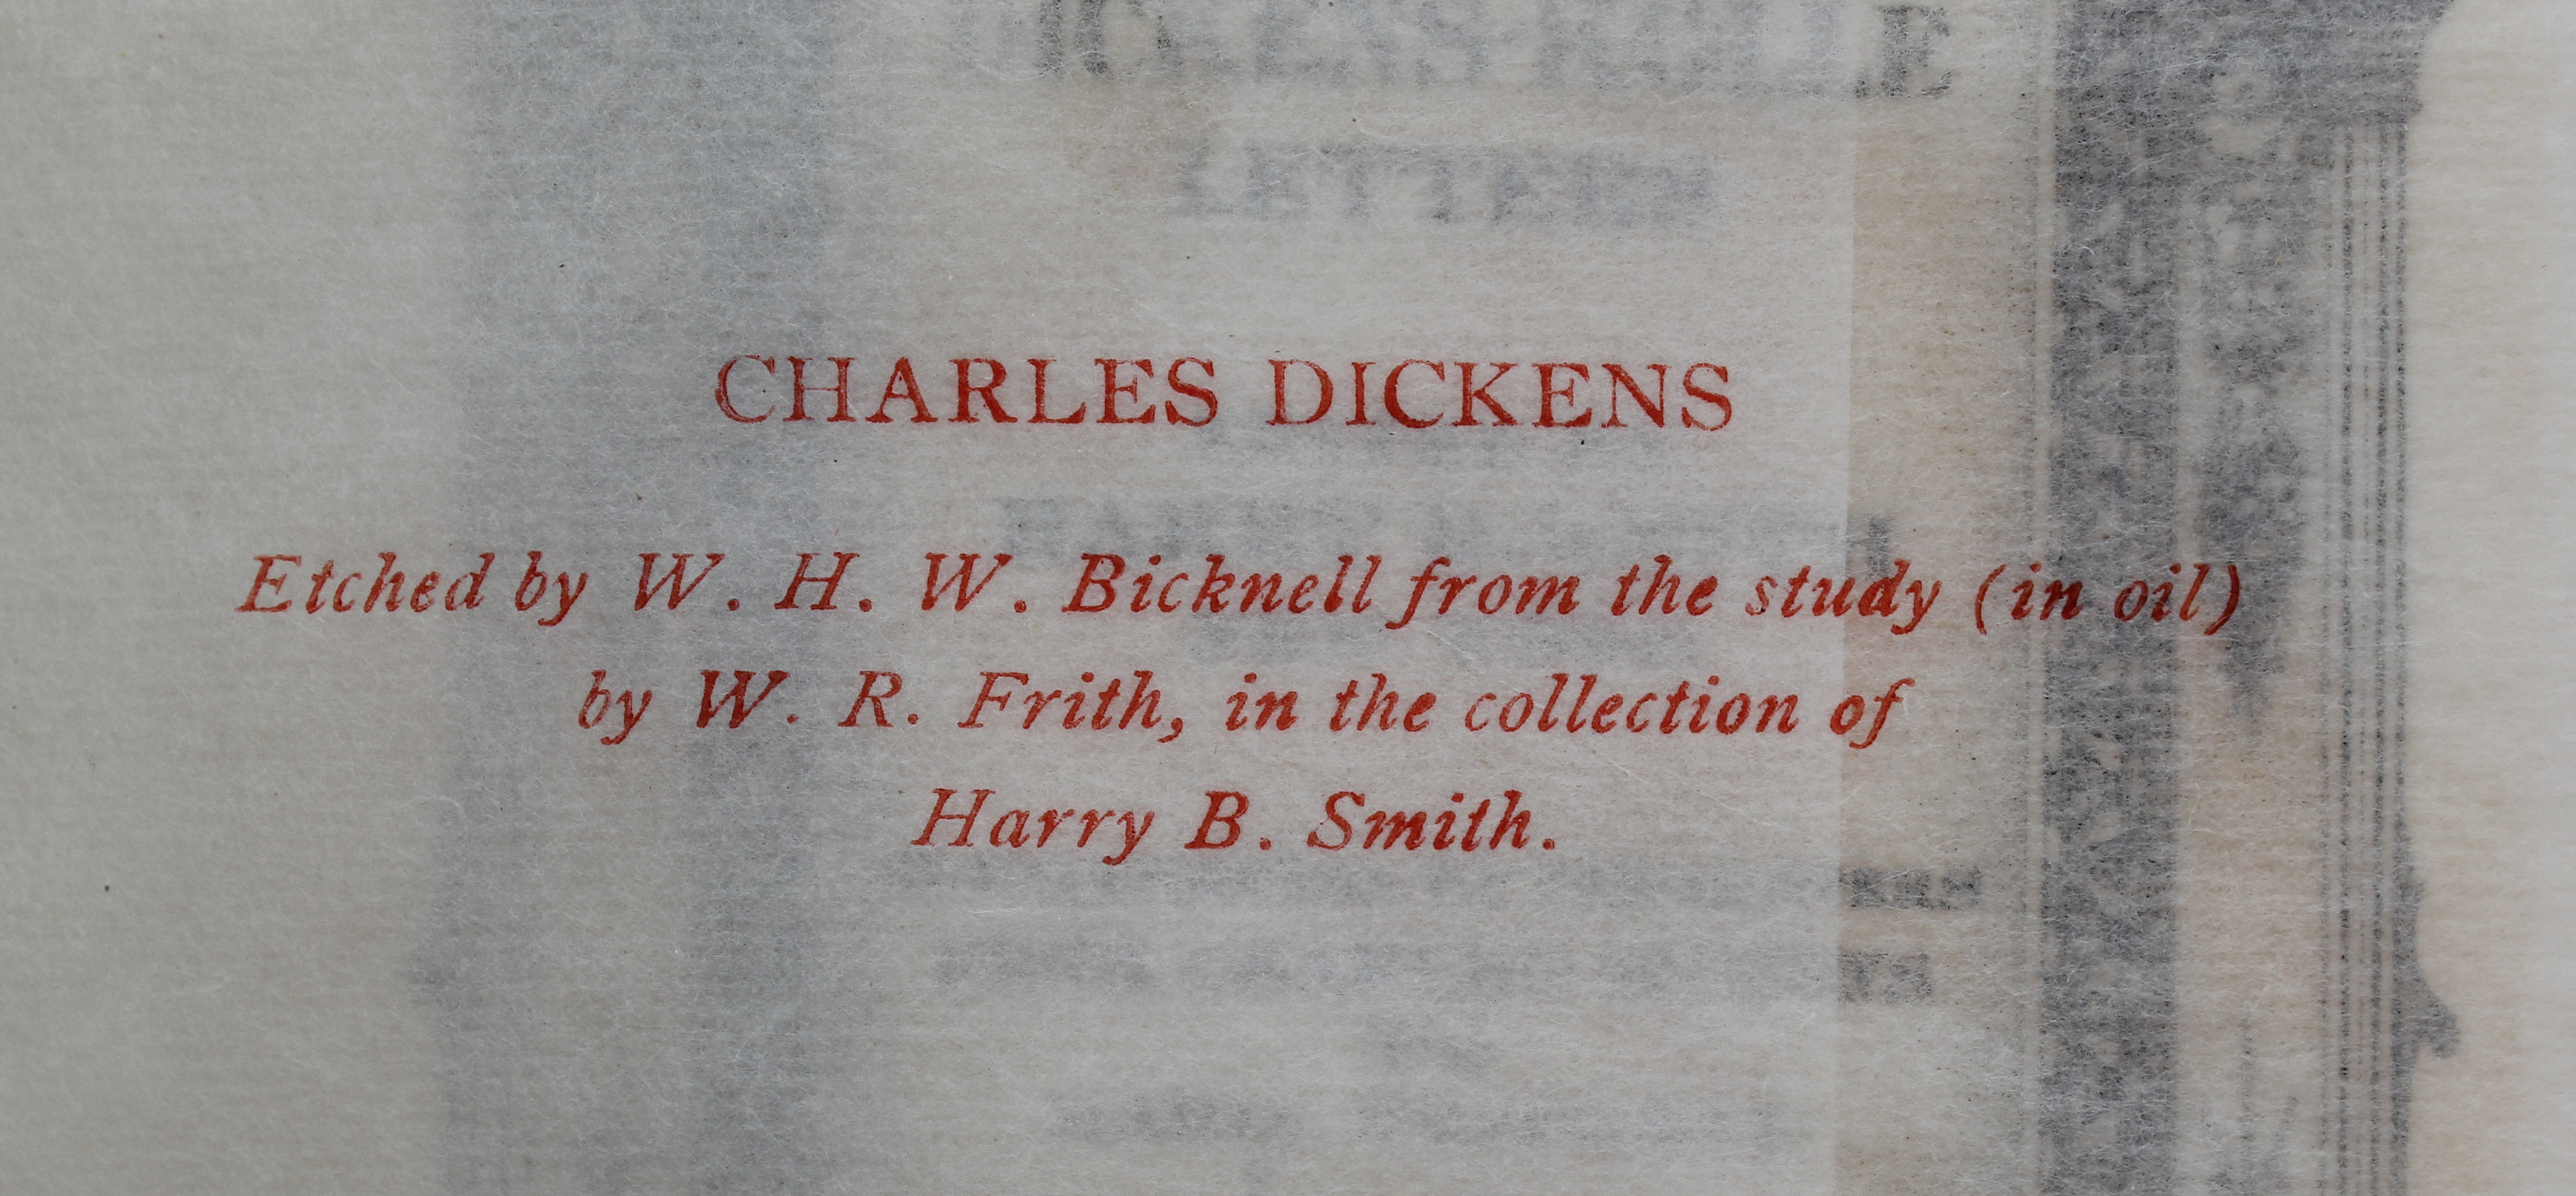 Dickens- Kolle Letters, Ed by Harry B. Smith 1910 - Image 4 of 6